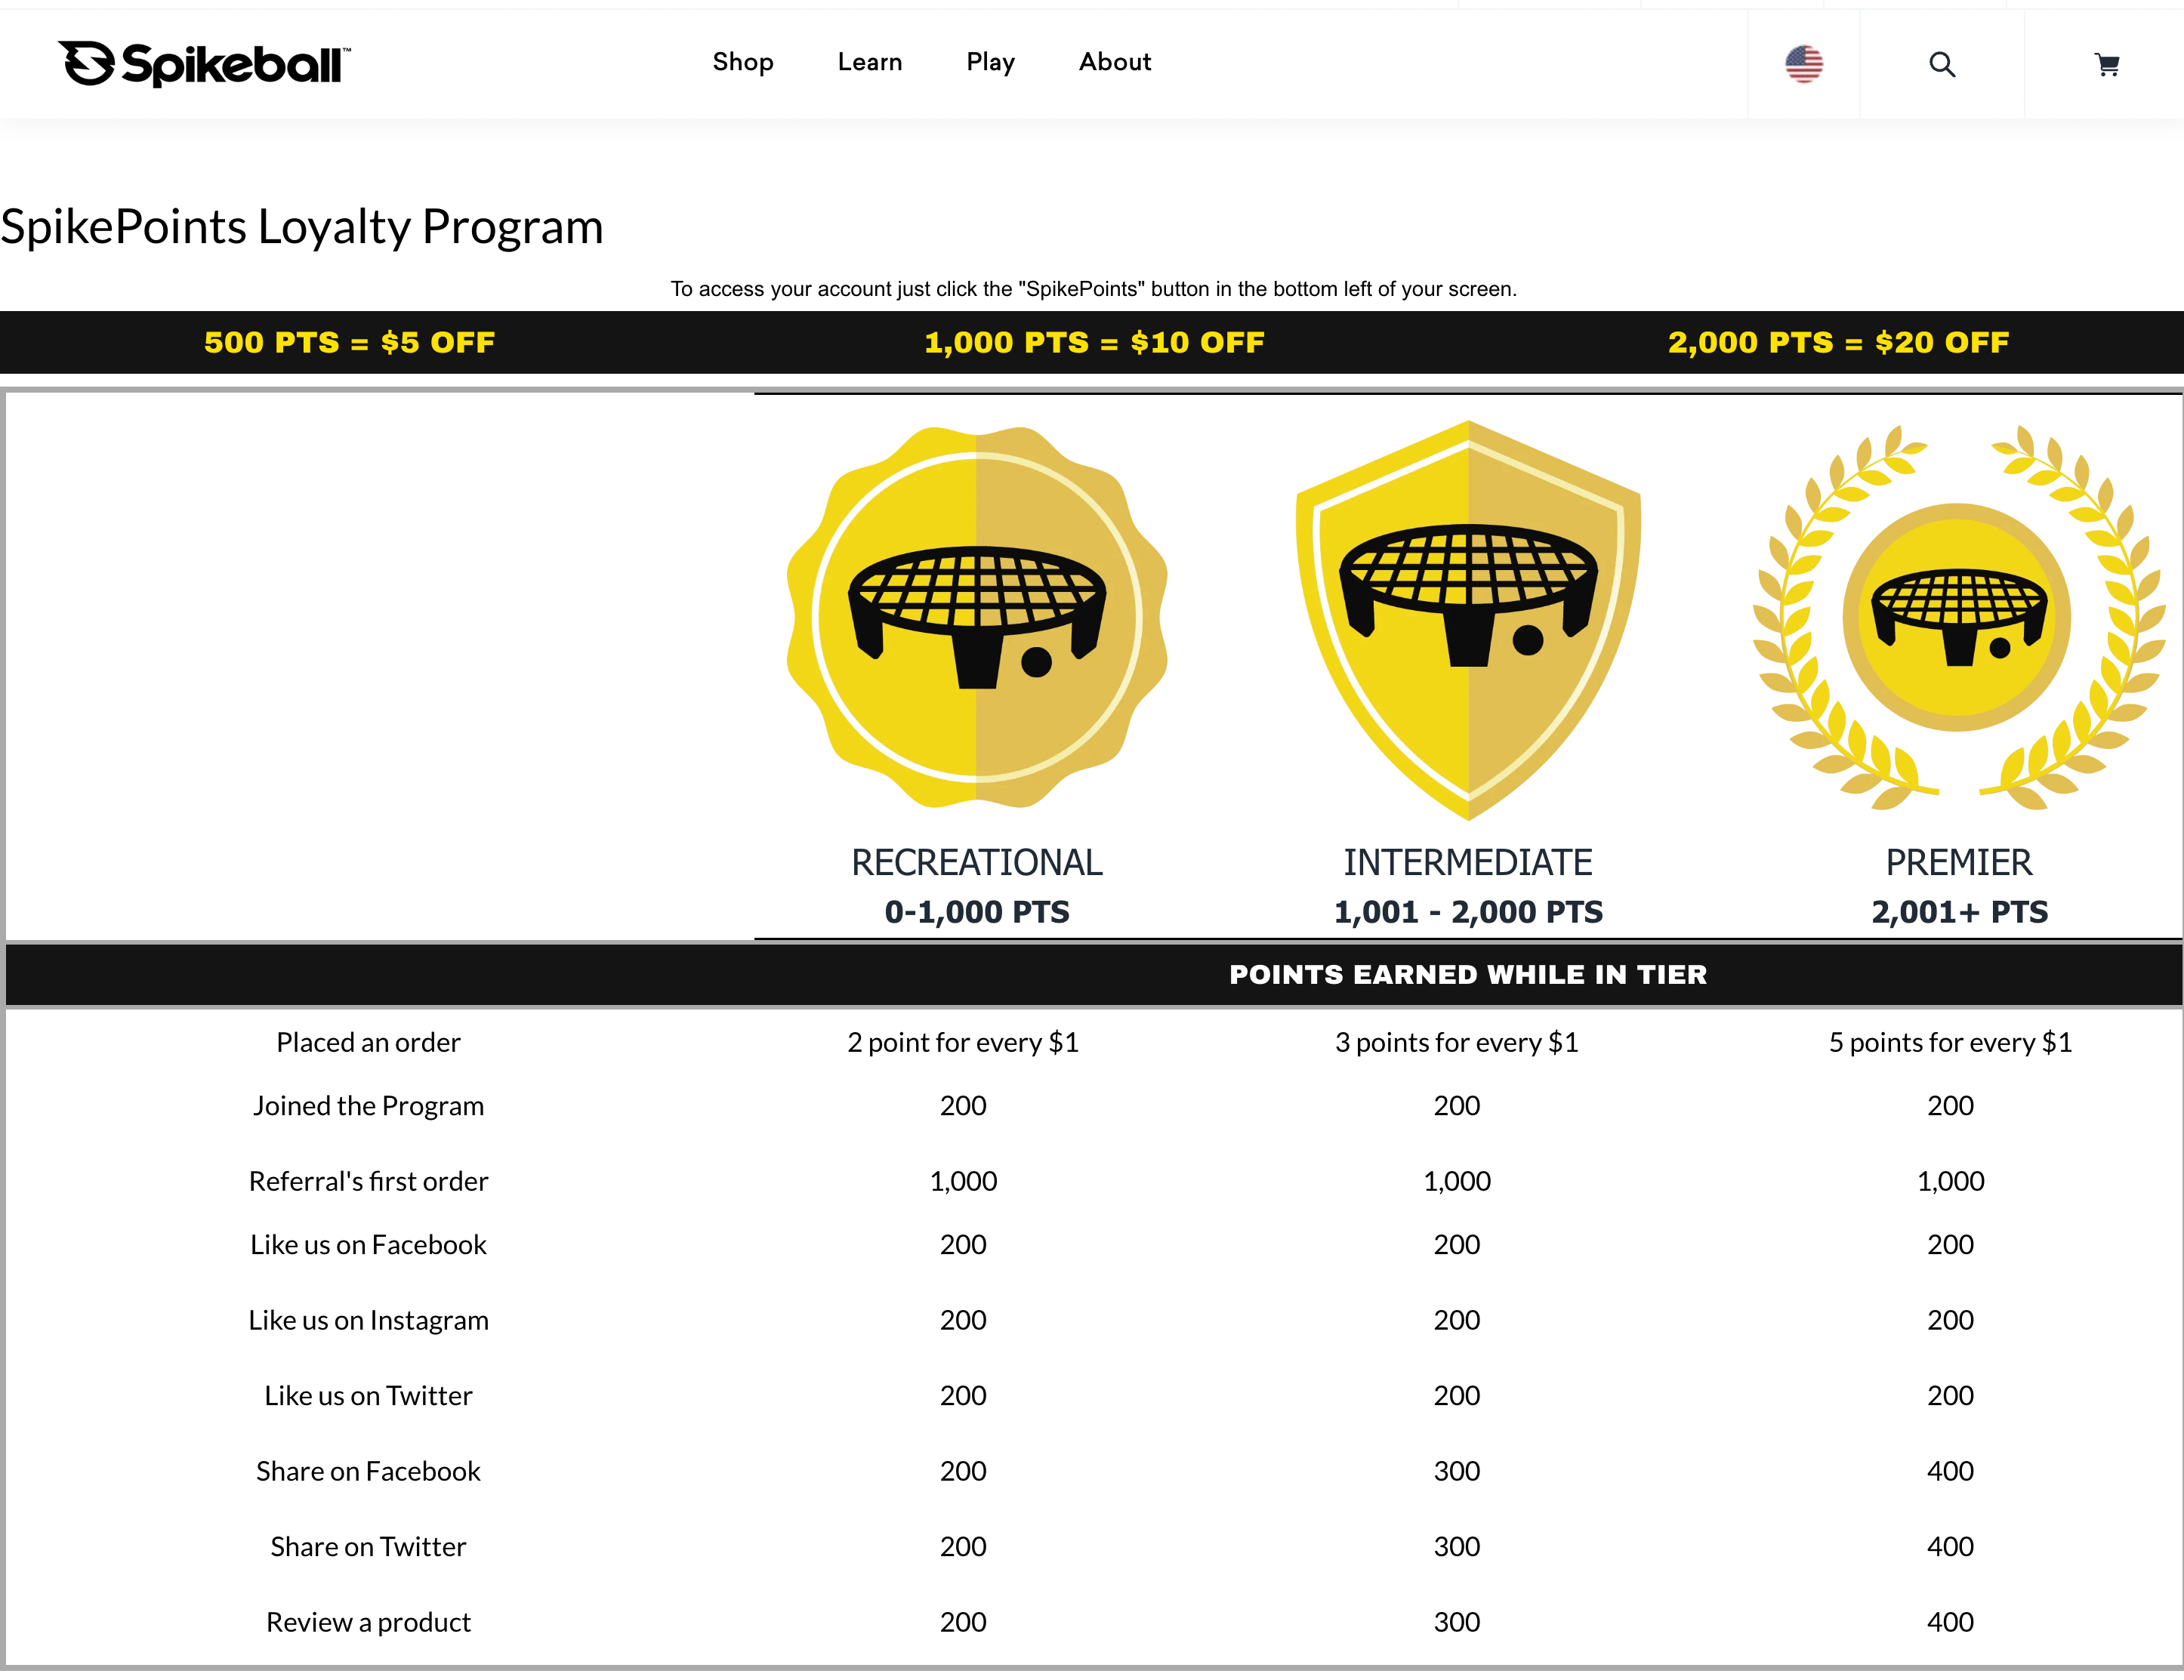 A screenshot from Spikeball’s SpikePoints loyalty program explainer page. There is a chart with branded icons for each VIP tier and a list of benefits for each tier.